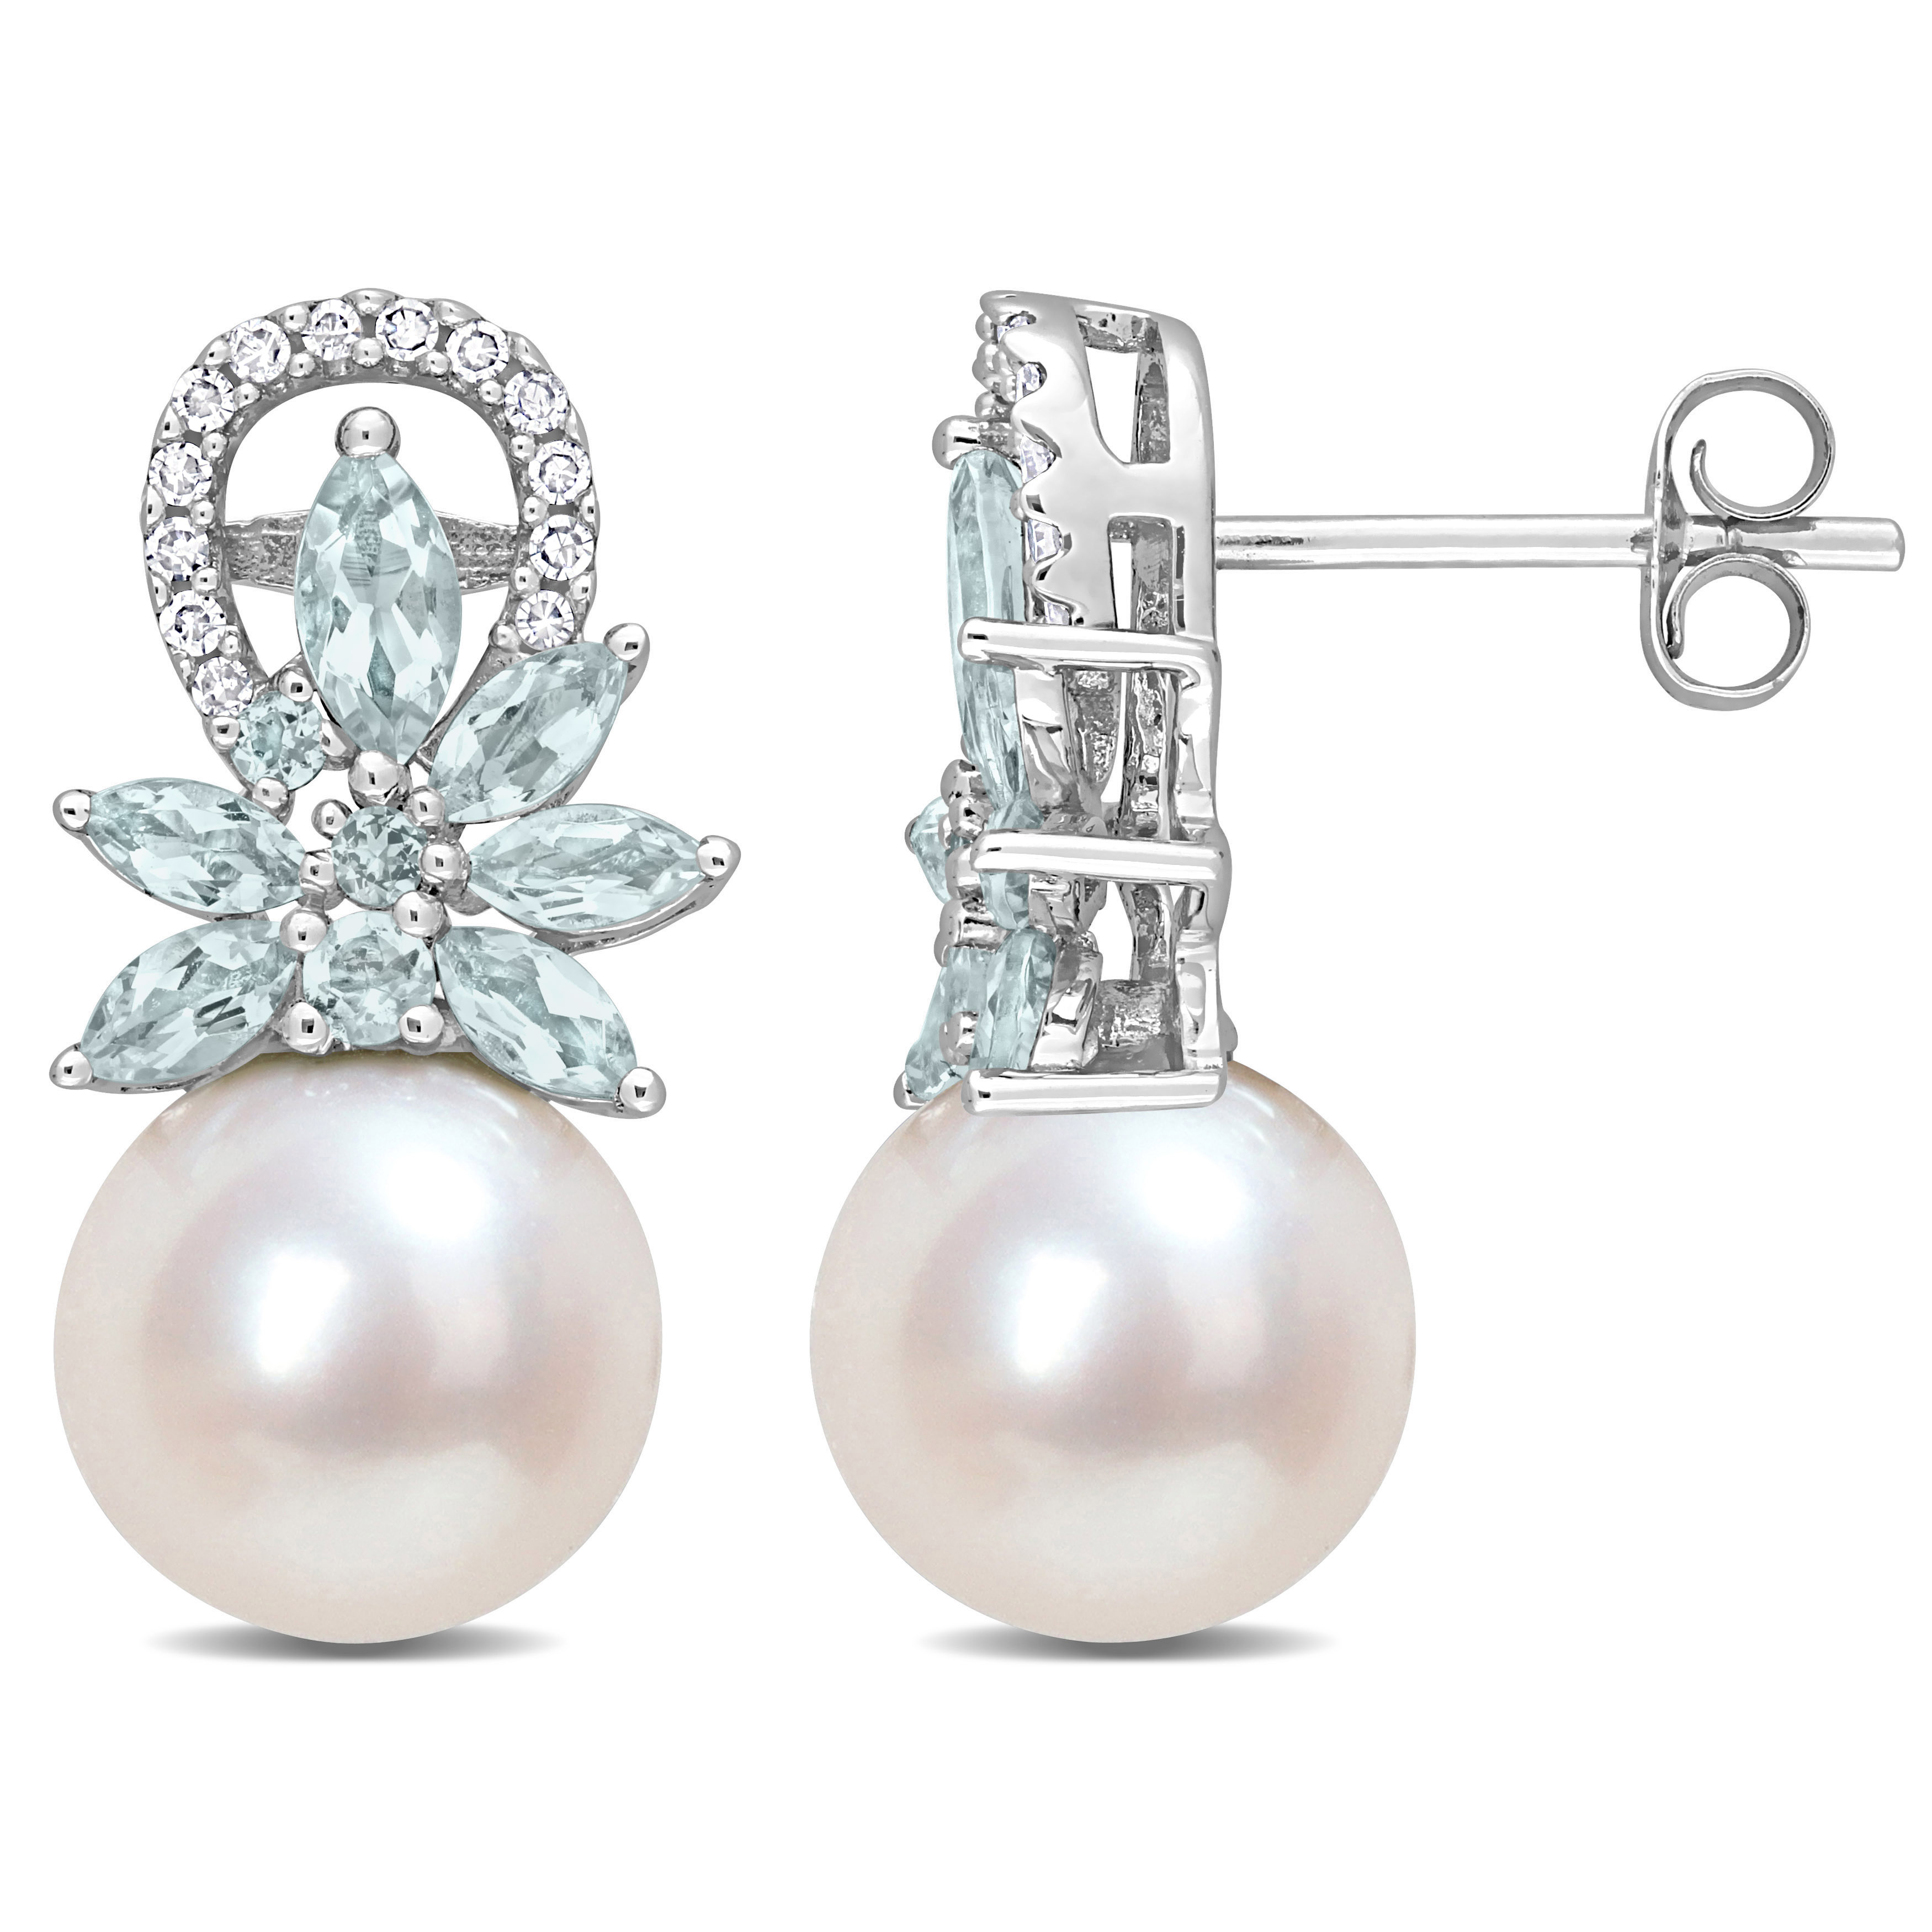 9 - 9.5 MM Cultured Freshwater Pearl and Aquamarine and 1/8 CT TW Diamond Flower Drop Earrings in 14k White Gold